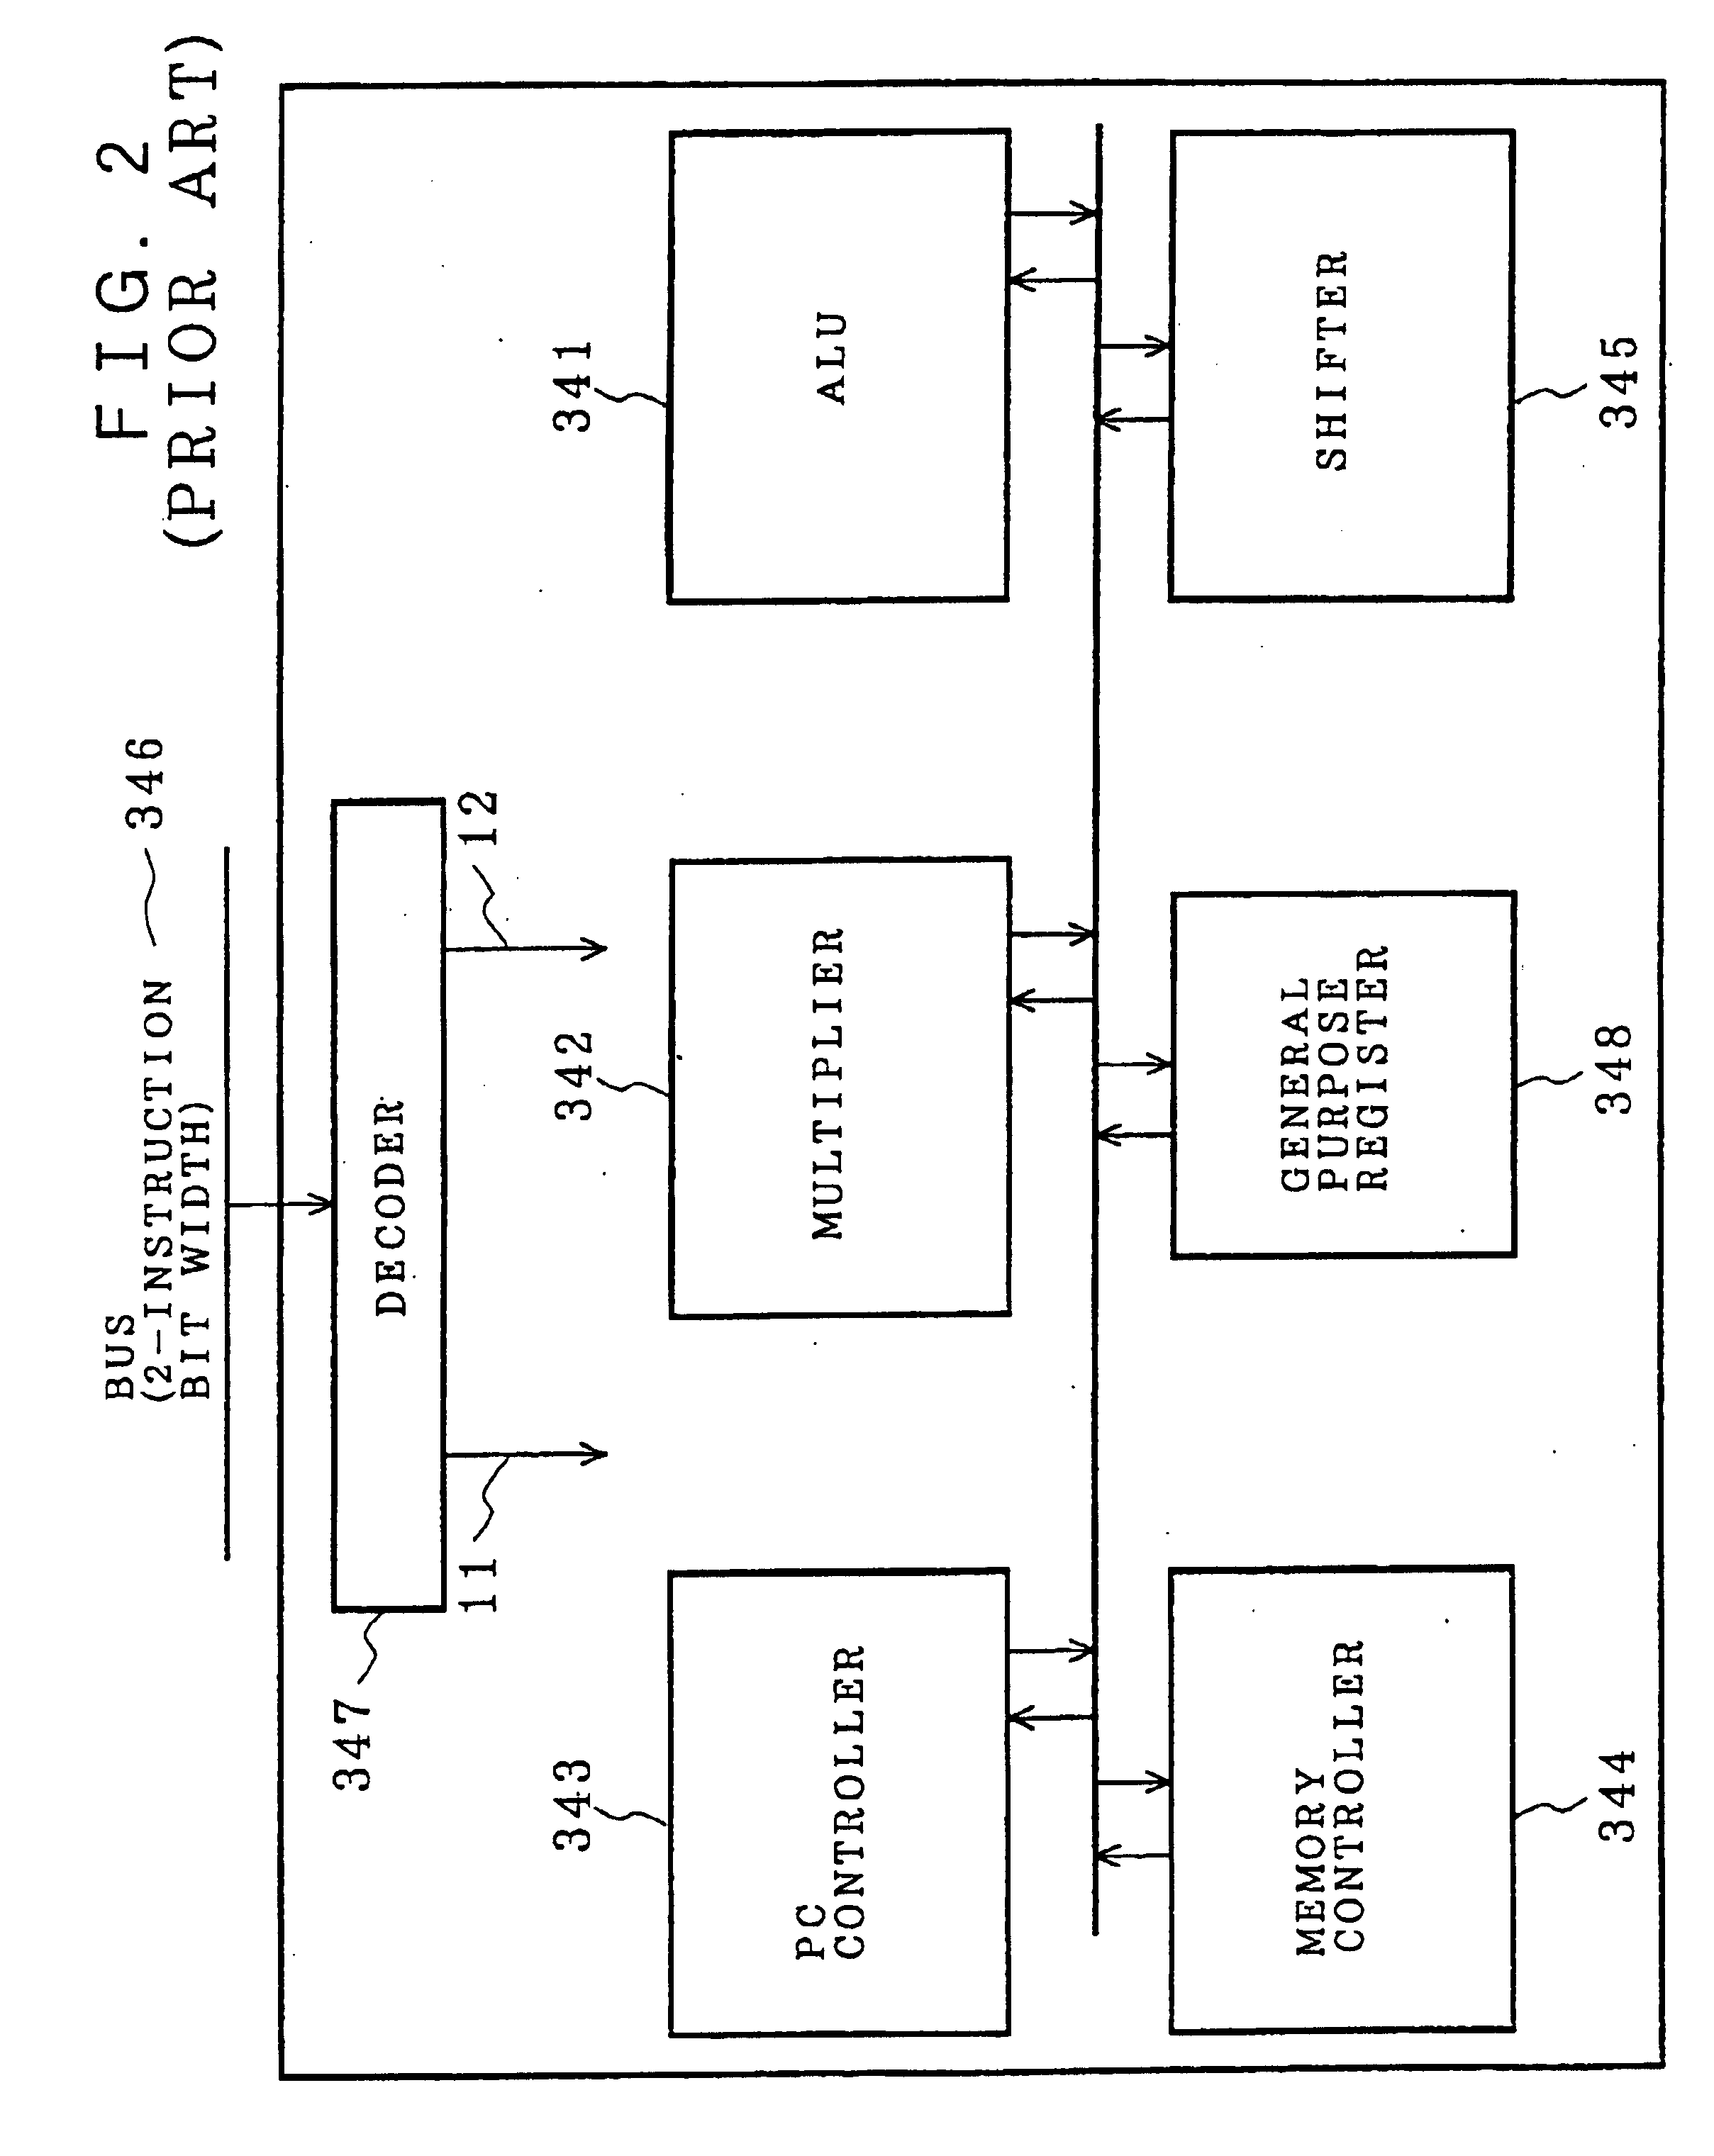 Microprocessor having delayed instructions with variable delay times for executing branch instructions